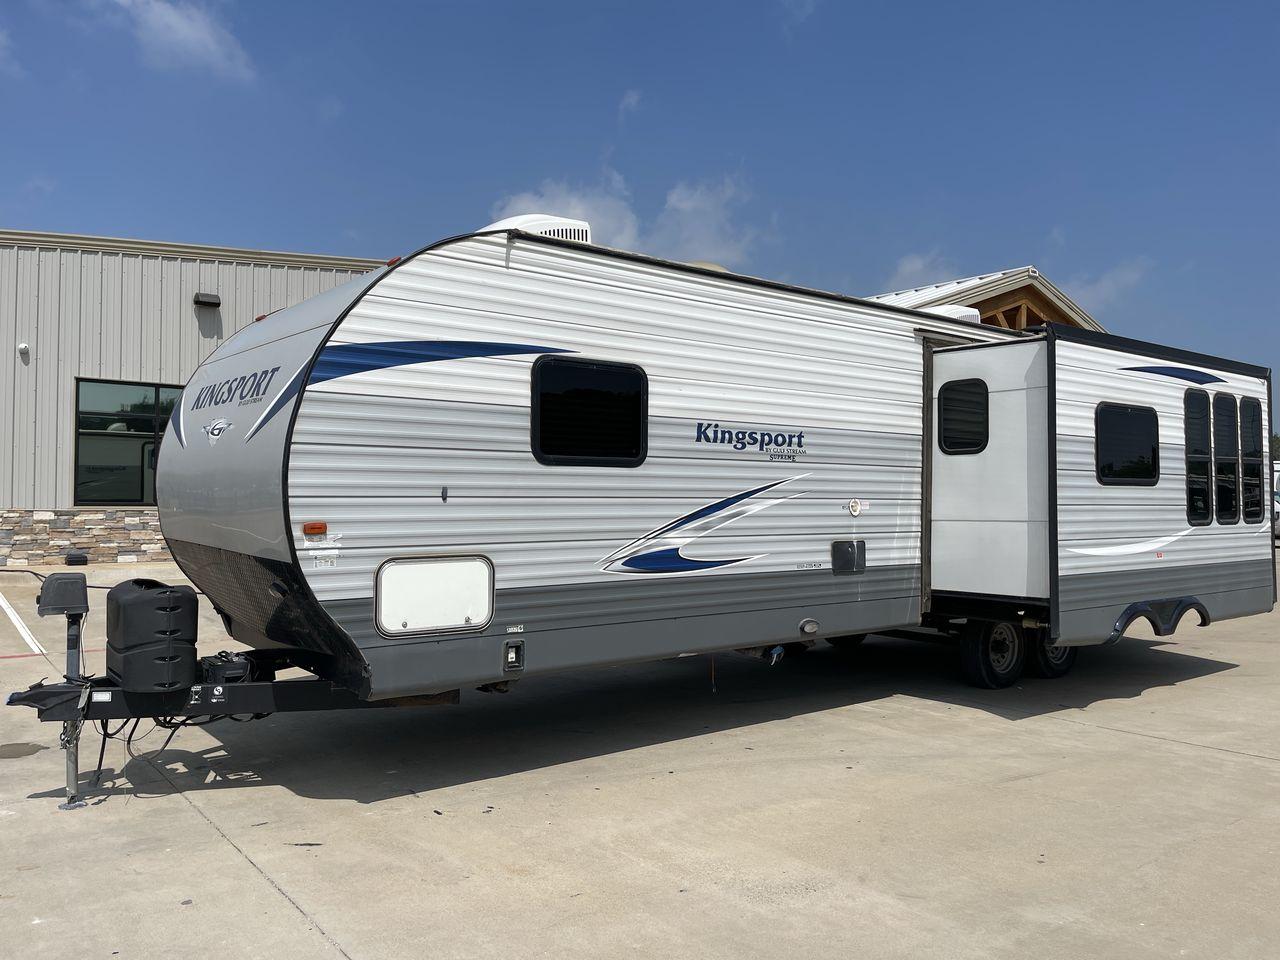 2019 GRAY GULF STREAM KINGSPORT 295SBW - (1NL1G3524K1) , Length: 34.5 ft | Dry Weight: 6,778 lbs | Slides: 1 transmission, located at 4319 N Main Street, Cleburne, TX, 76033, (817) 221-0660, 32.435829, -97.384178 - The 2019 Gulf Stream Kingsport 295SBW combines comfort and functionality in a well-designed package. This travel trailer is ready to meet your demands on the road. The Gulf Stream Kingsport 295SBW is 34.5 feet long and has a dry weight of 6,778 pounds, striking a compromise between size and maneuver - Photo #23